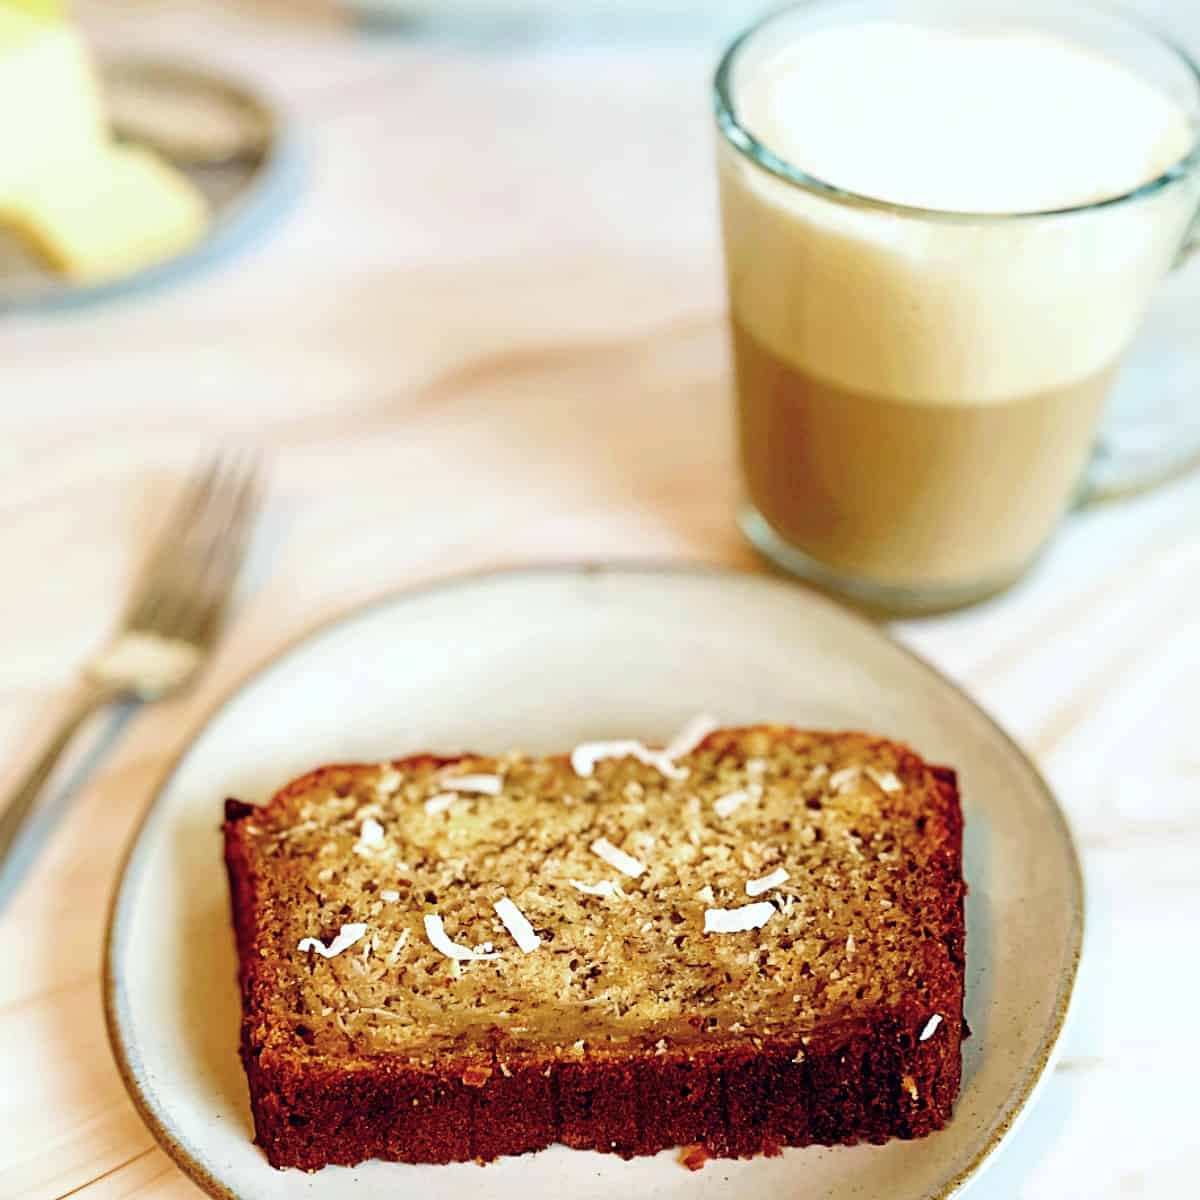 slice of banana bread and a latte